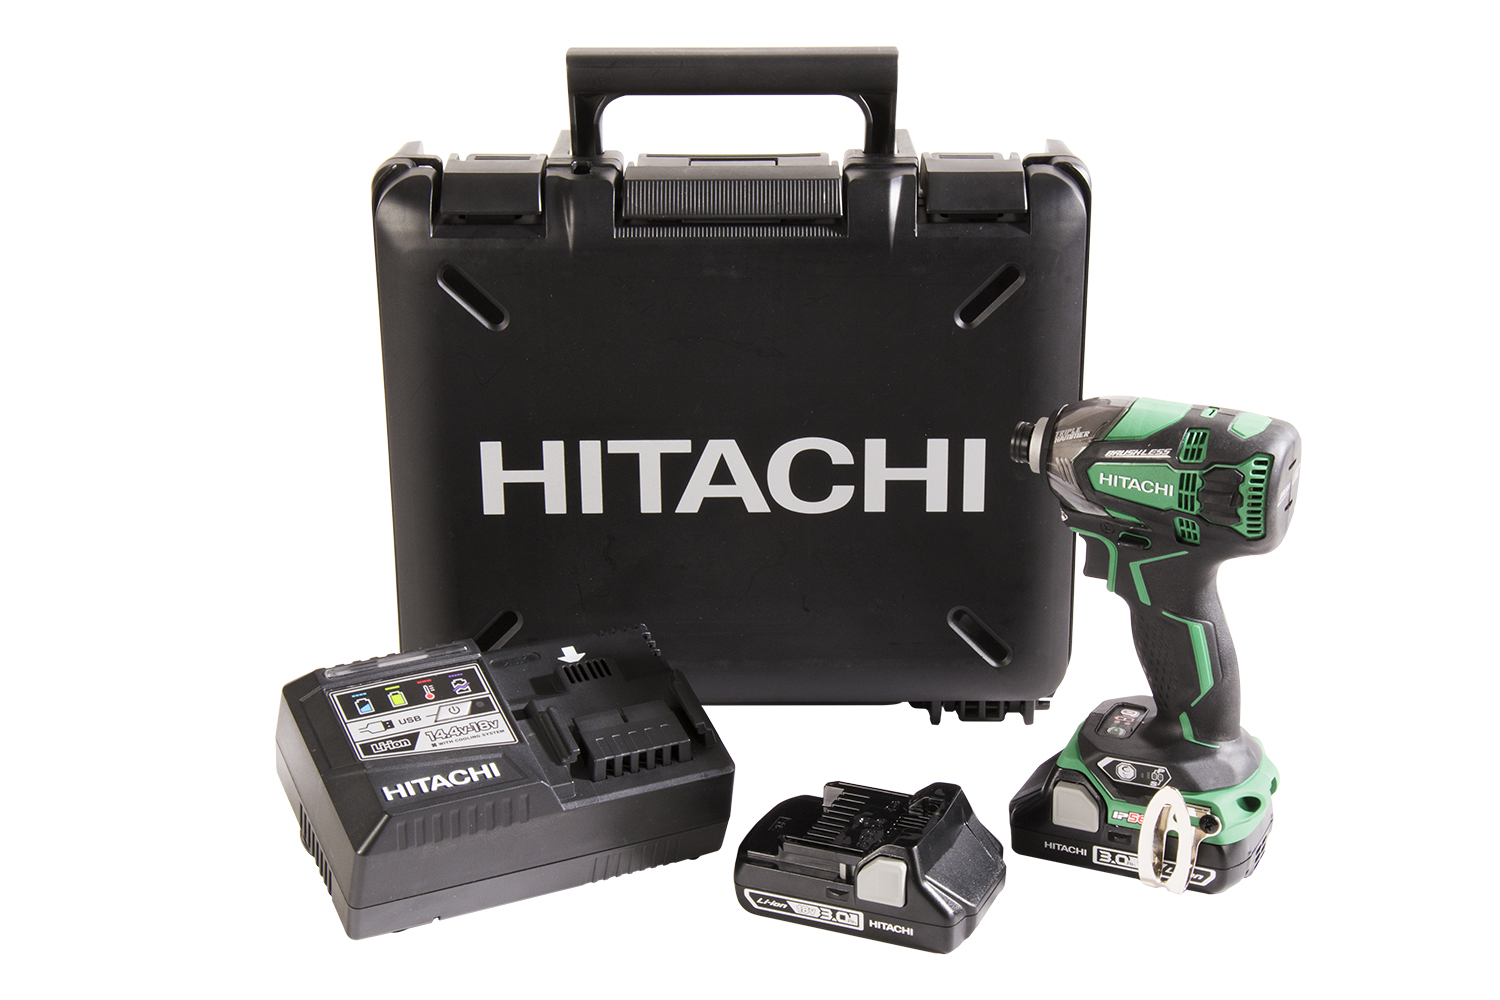 Hitachi Power Tools announced the newest addition to its 18V Brushless Lithium Ion Cordless line, the WH18DBDL2 Triple Hammer Impact Driver